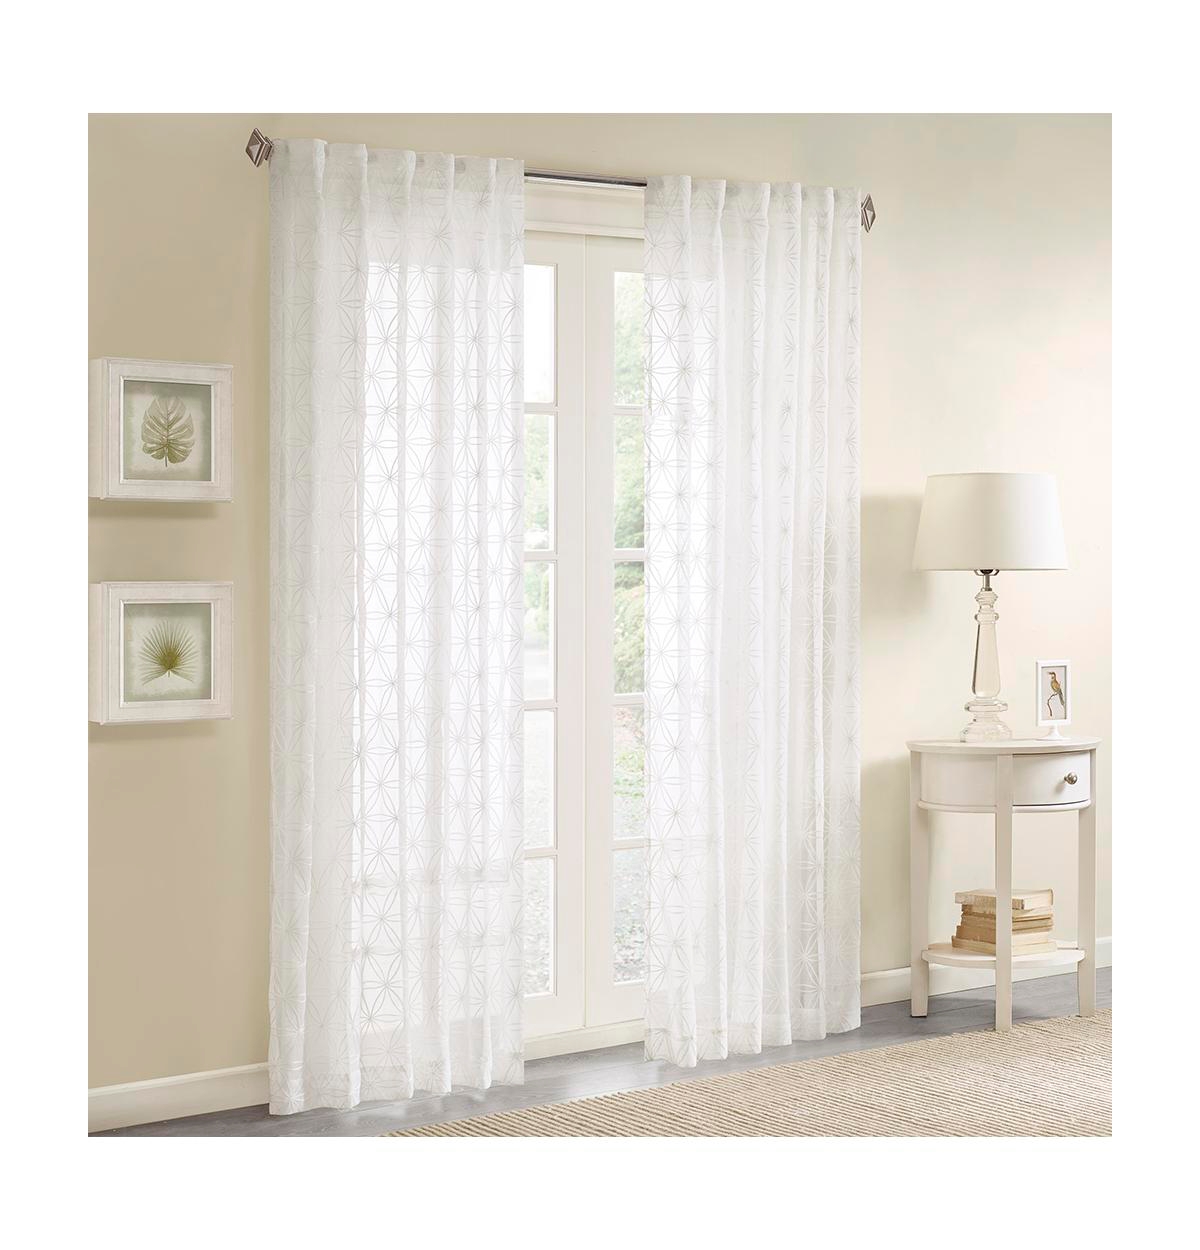 Gemma Sheer Embroidered Window Curtain, 50"W x 84"L - White